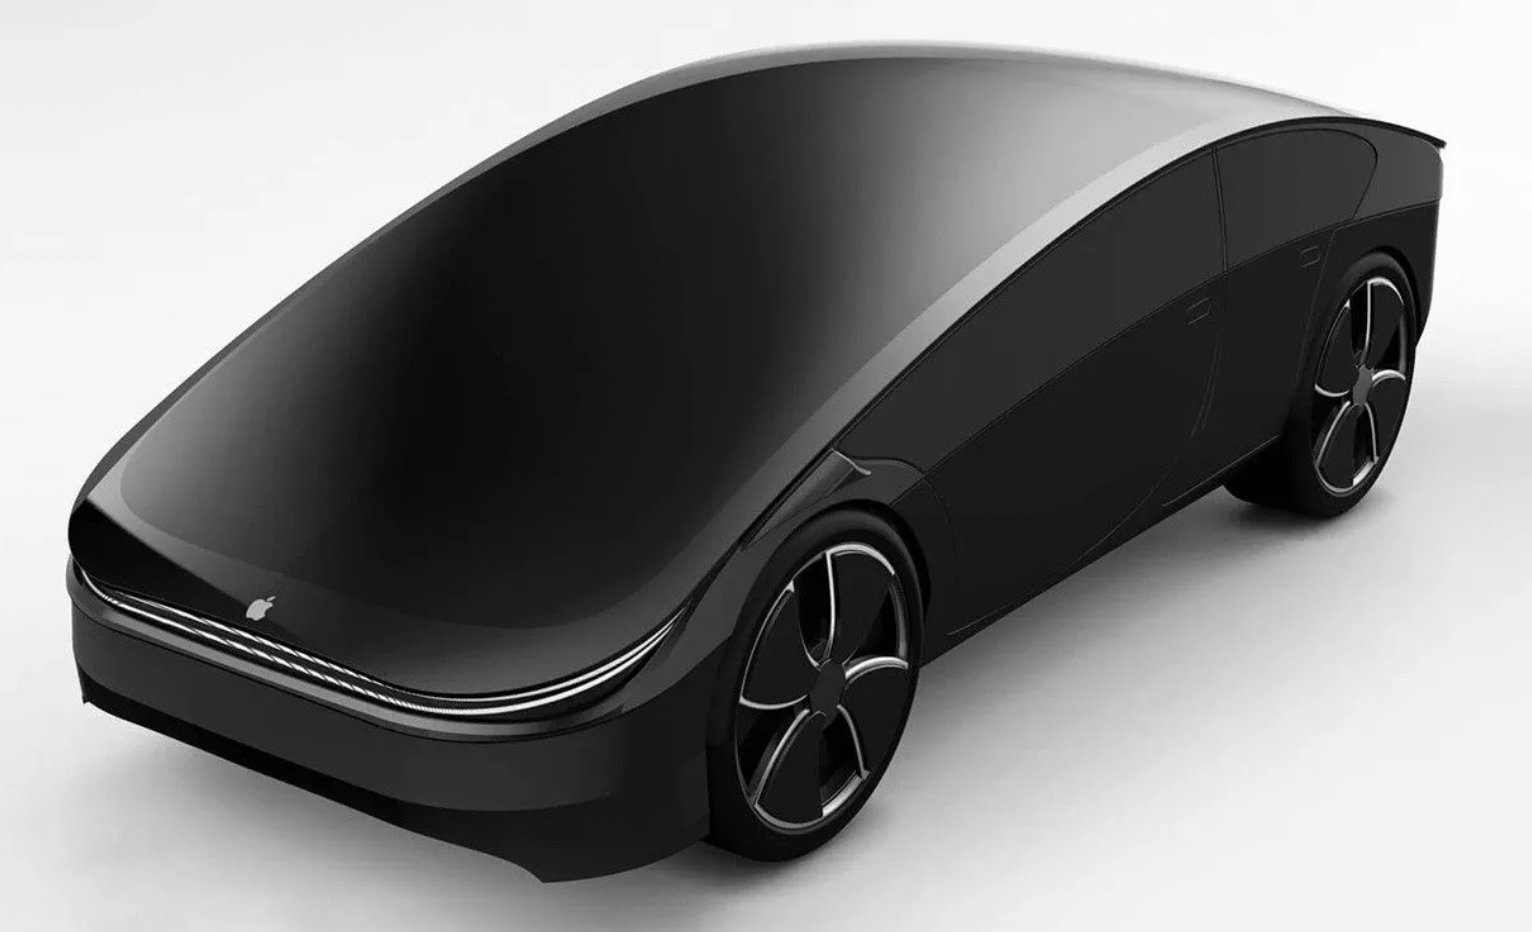 Apple car could feature no windows, no steering wheel, and no foot pedals